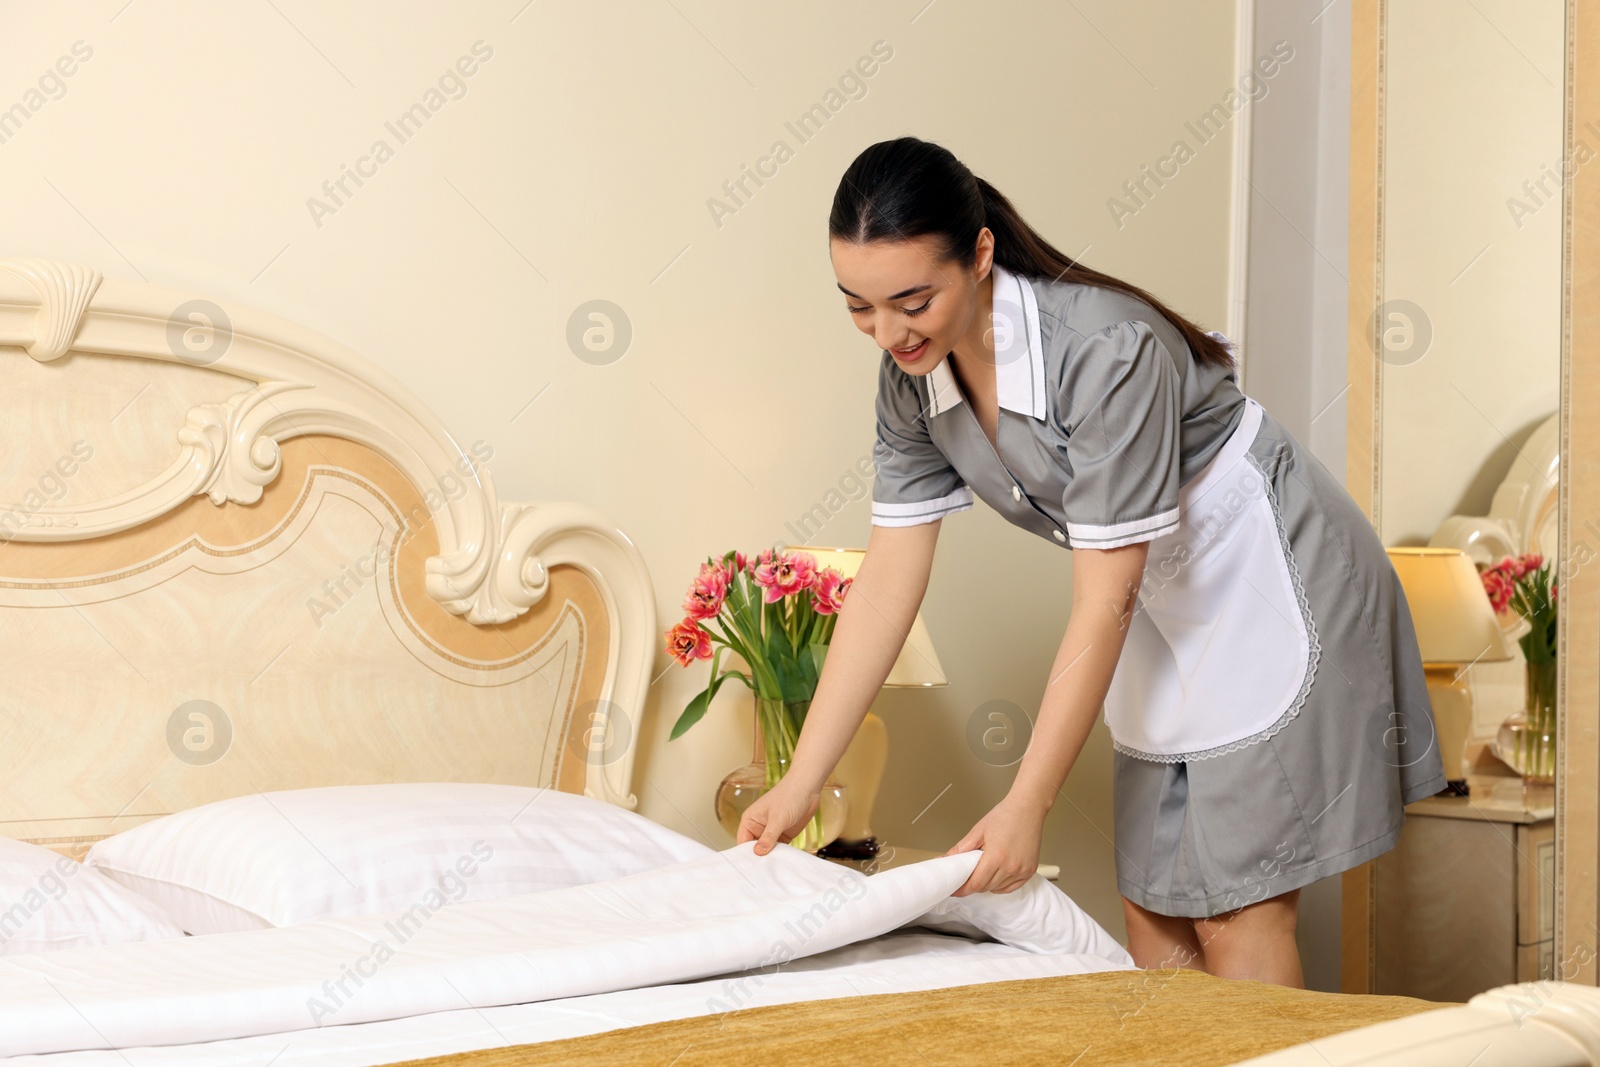 Photo of Young chambermaid making bed in hotel room. Space for text